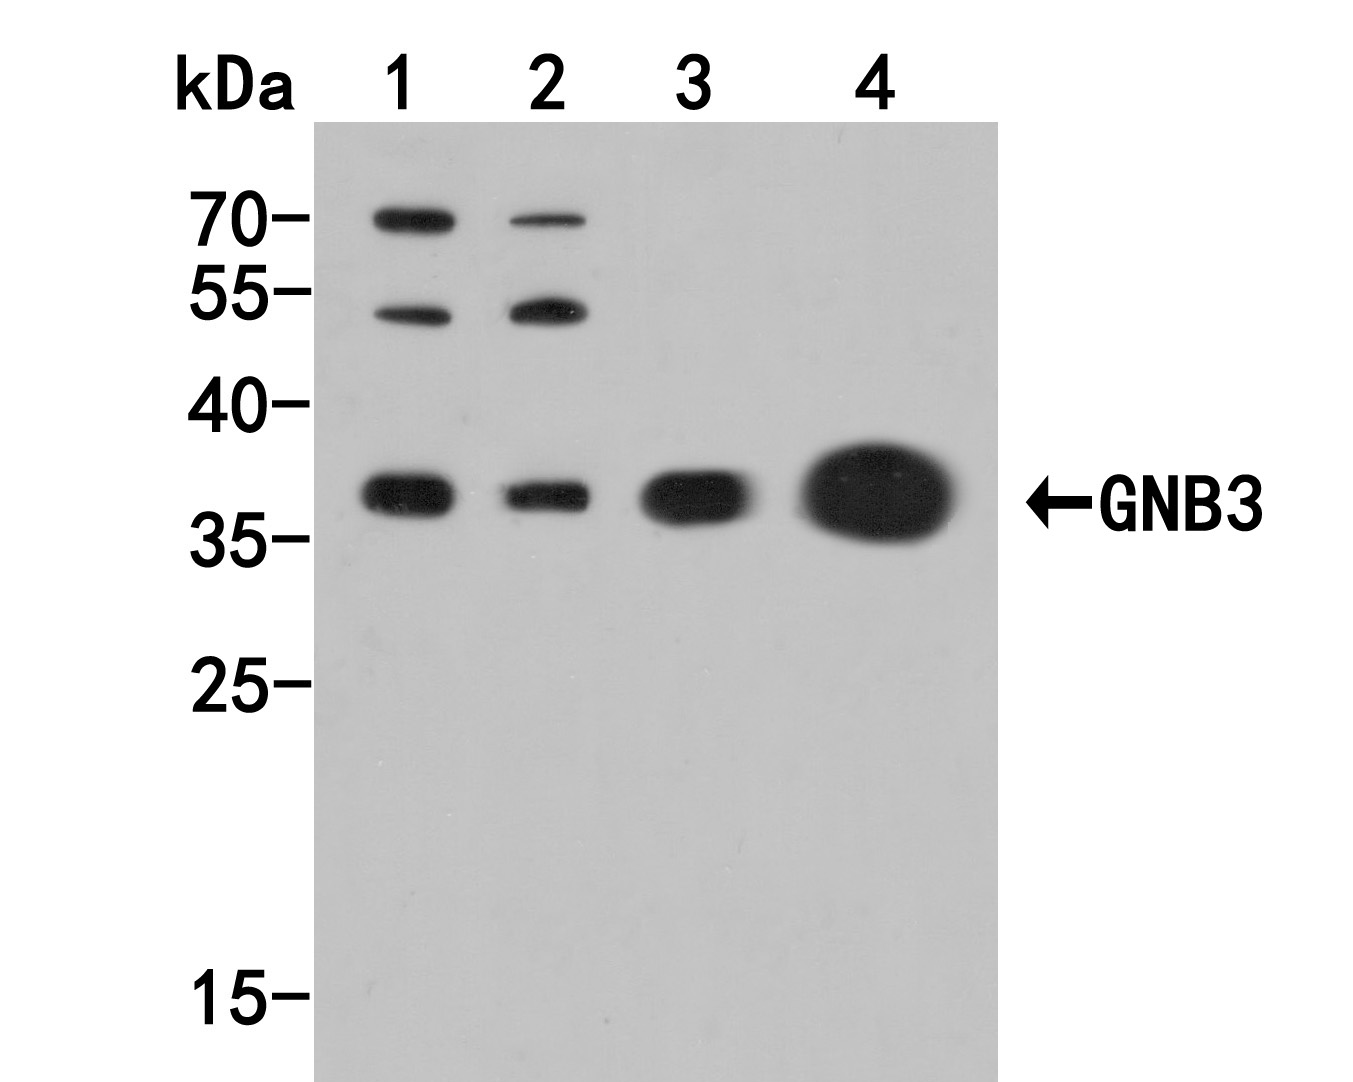 Western blot analysis of GNB3 on different lysates. Proteins were transferred to a PVDF membrane and blocked with 5% BSA in PBS for 1 hour at room temperature. The primary antibody (HA500127, 1/1,000) was used in 5% BSA at room temperature for 2 hours. Goat Anti-Rabbit IgG - HRP Secondary Antibody (HA1001) at 1:200,000 dilution was used for 1 hour at room temperature.<br />
Positive control: <br />
Lane 1: HepG2 cell lysate<br />
Lane 2: A549 cell lysate<br />
Lane 3: Mouse kidney tissue lysate<br />
Lane 4: Rat brian tissue lysate